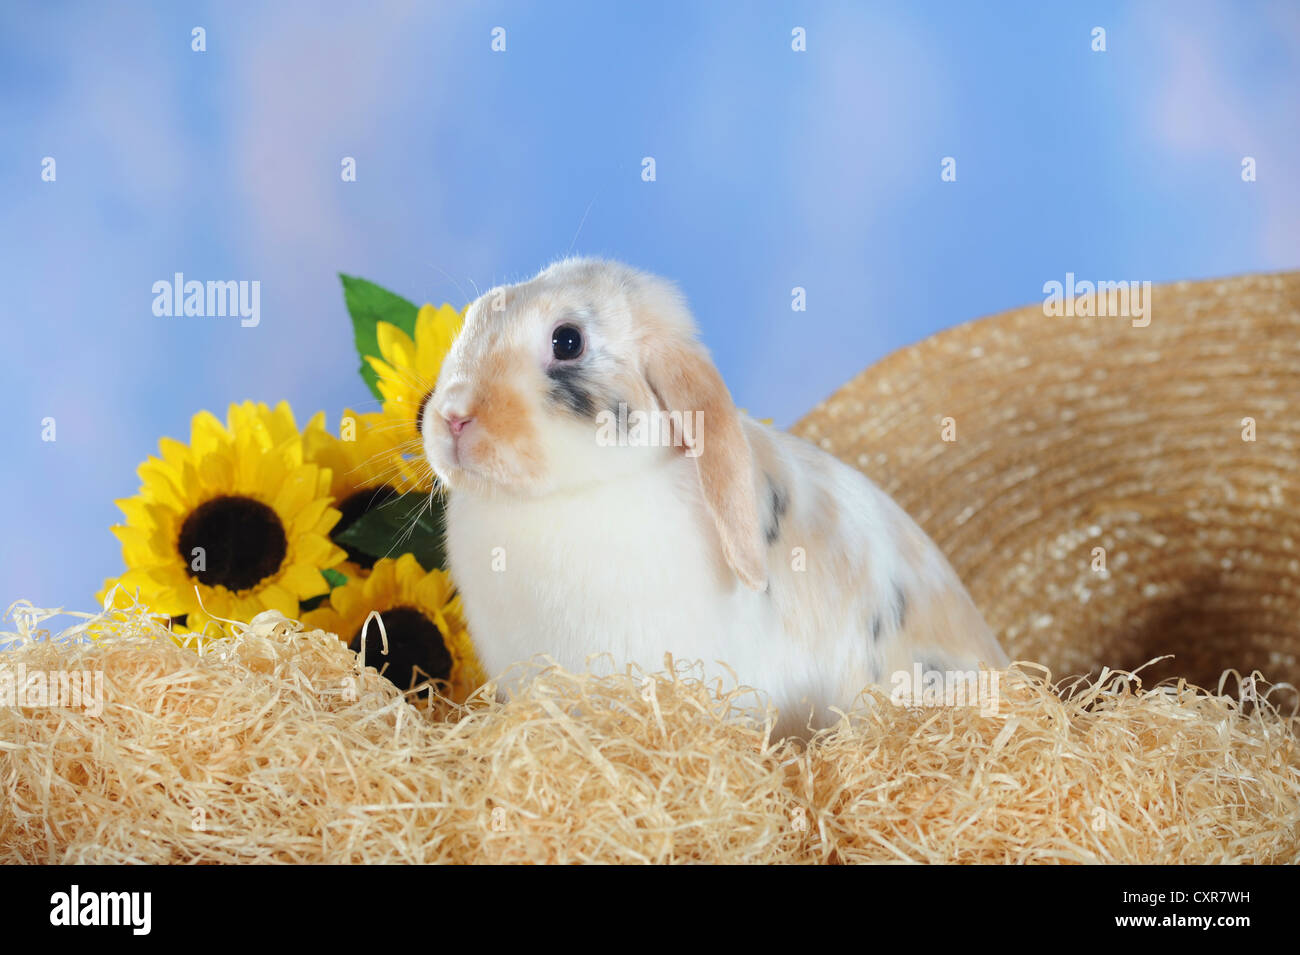 Spotted long eared rabbit sitting on wood wool Stock Photo